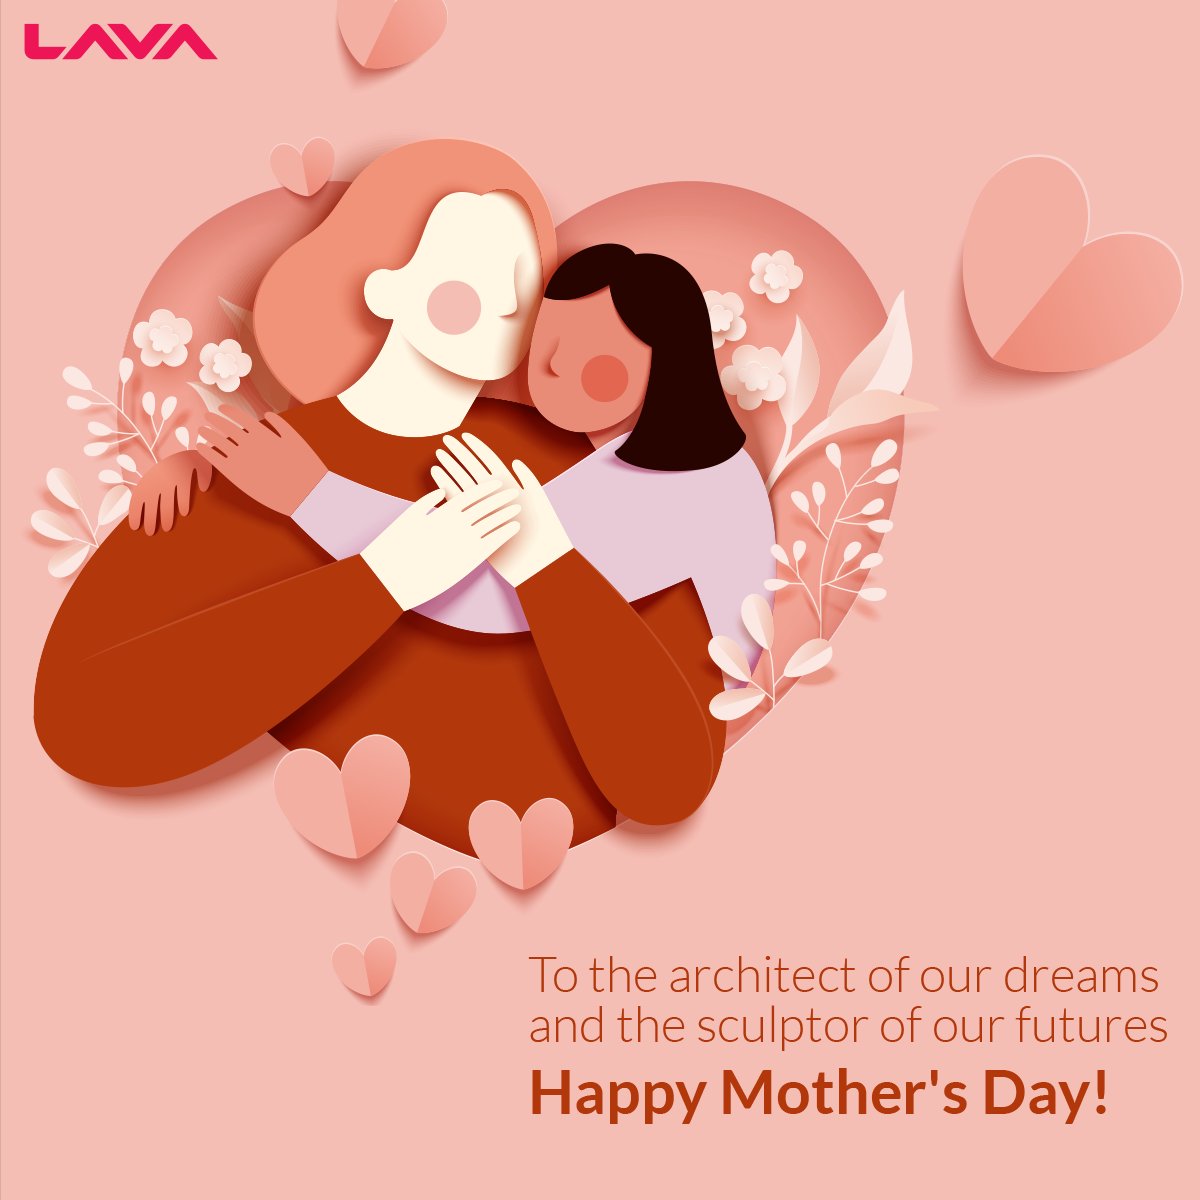 Maa, Amma, Mata ji, Mother Dear;
Divided by contact names, united by our love!

Wishing the ultimate multitaskers and the queens beyond our screens a very happy Mother's Day!👸🏻

#MothersDay #LavaMobiles #ProudlyIndian